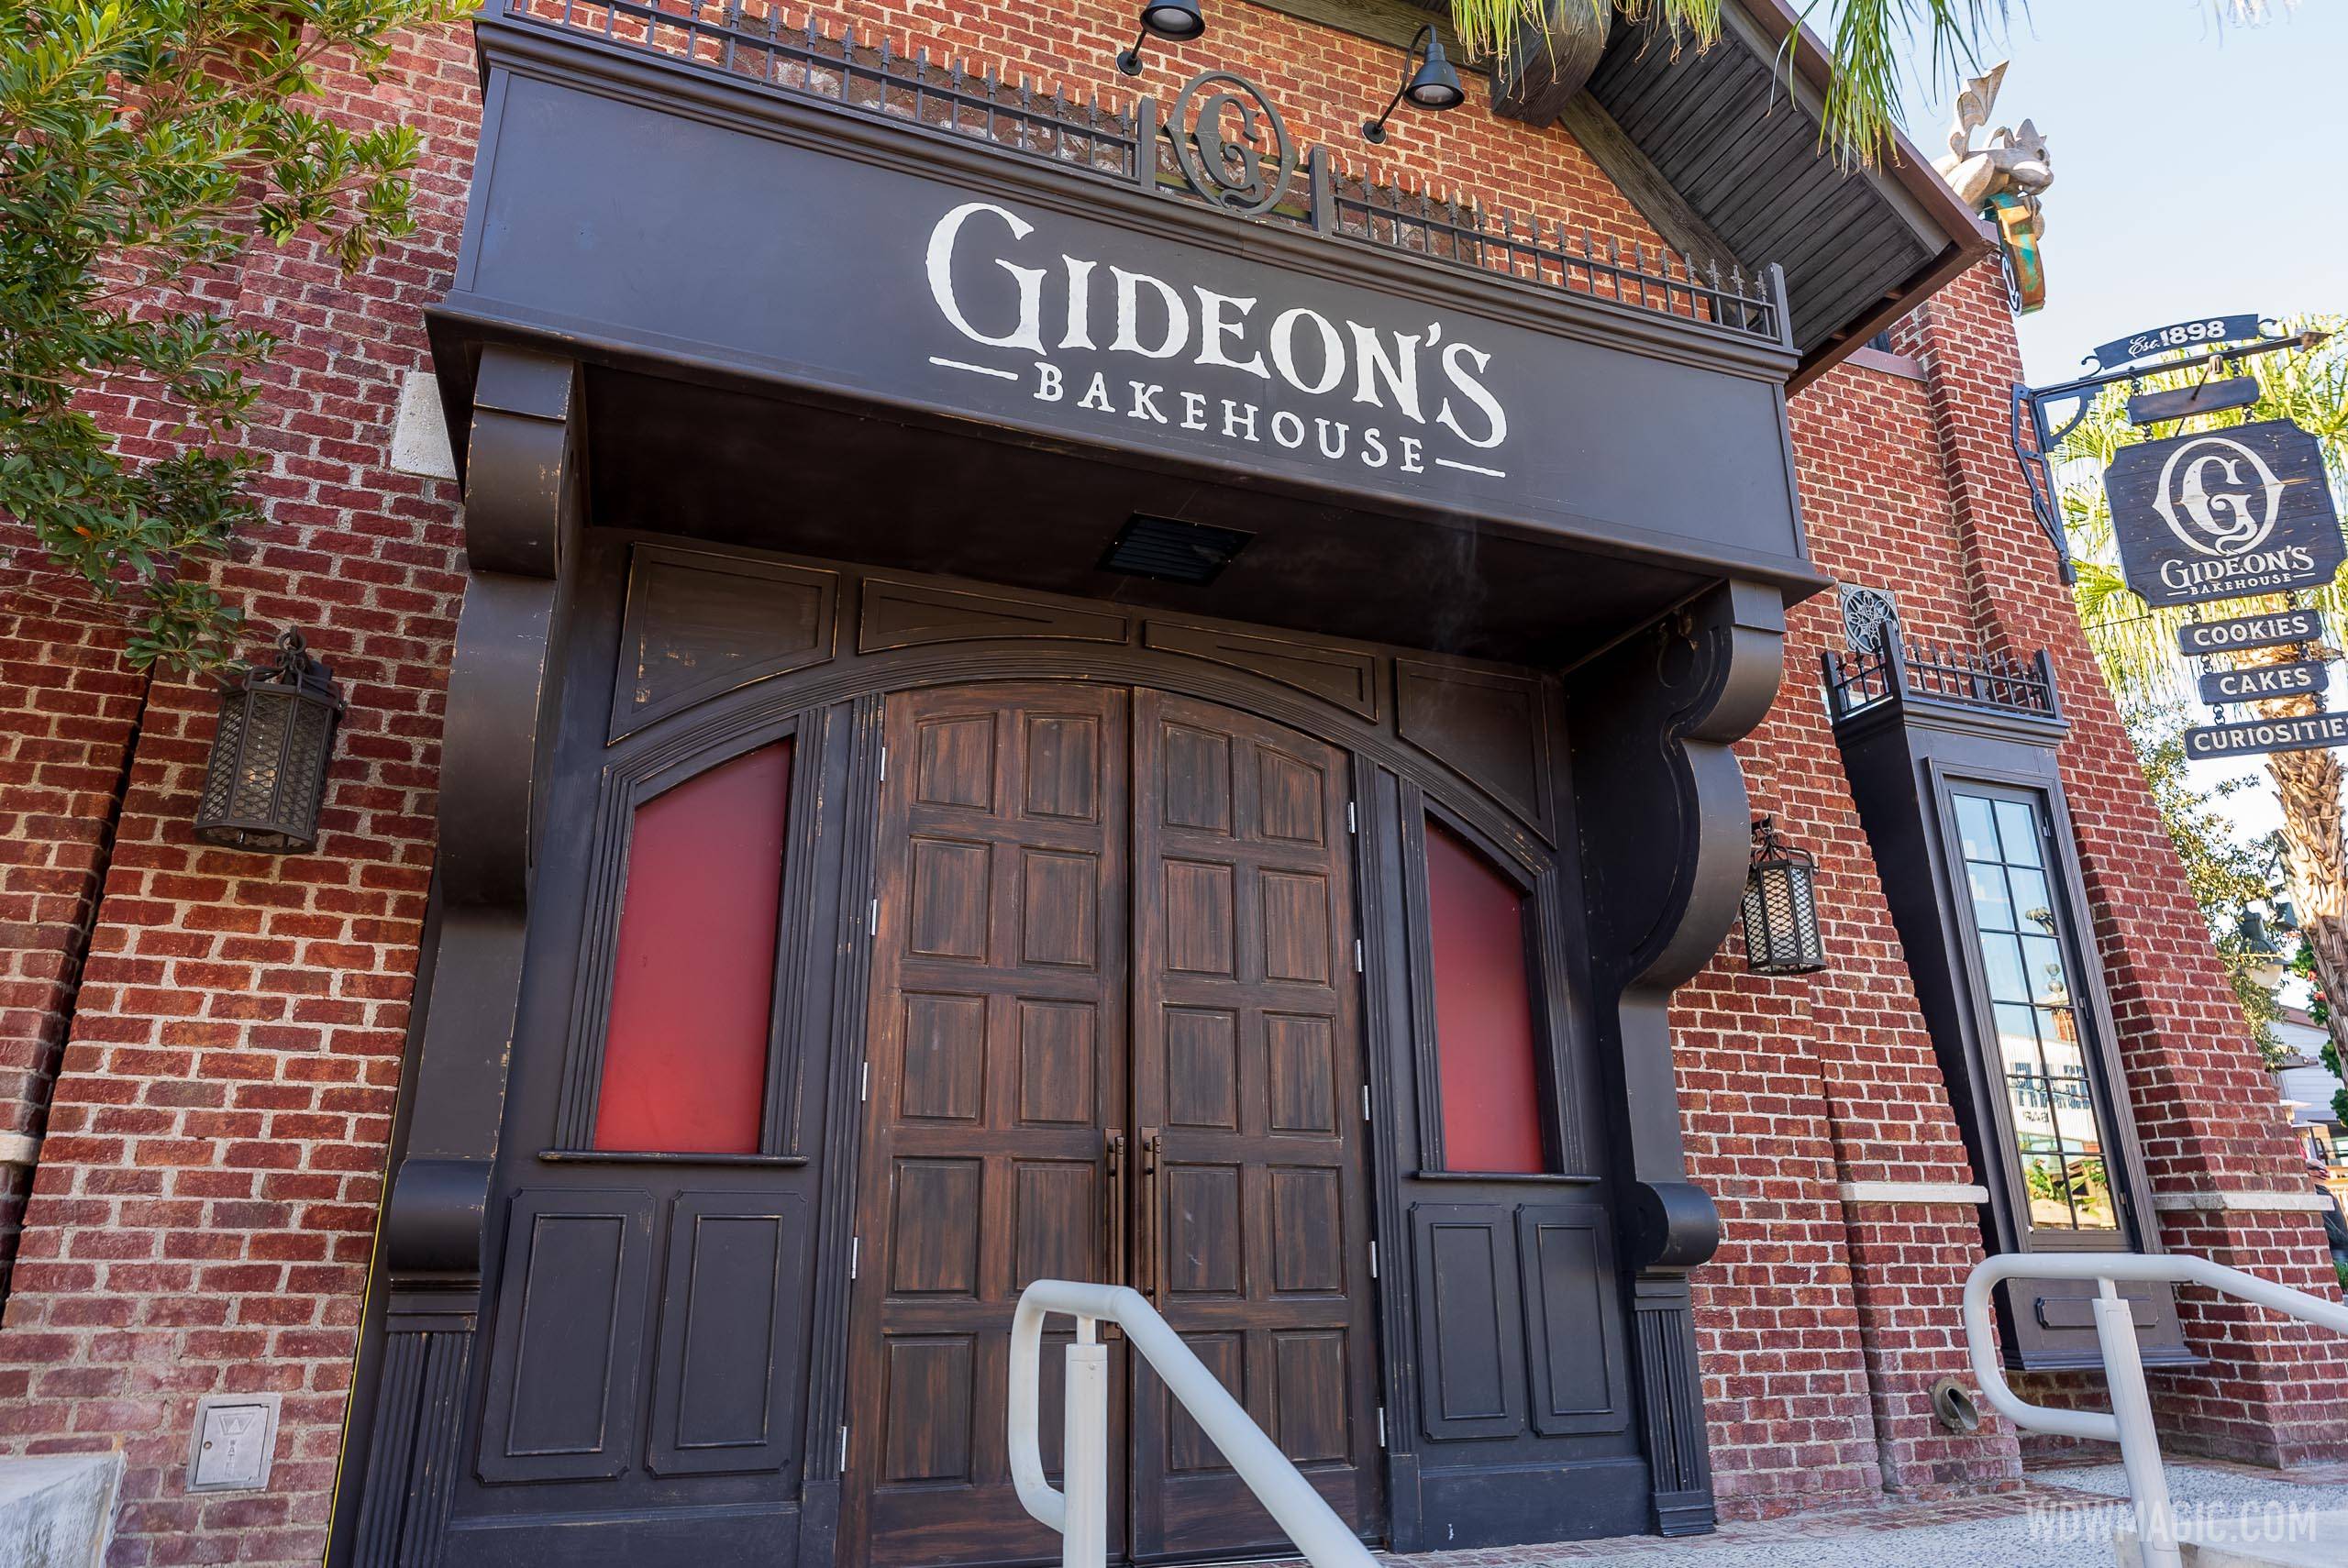 Gideon's Bakehouse is temporarily closed at Disney Springs